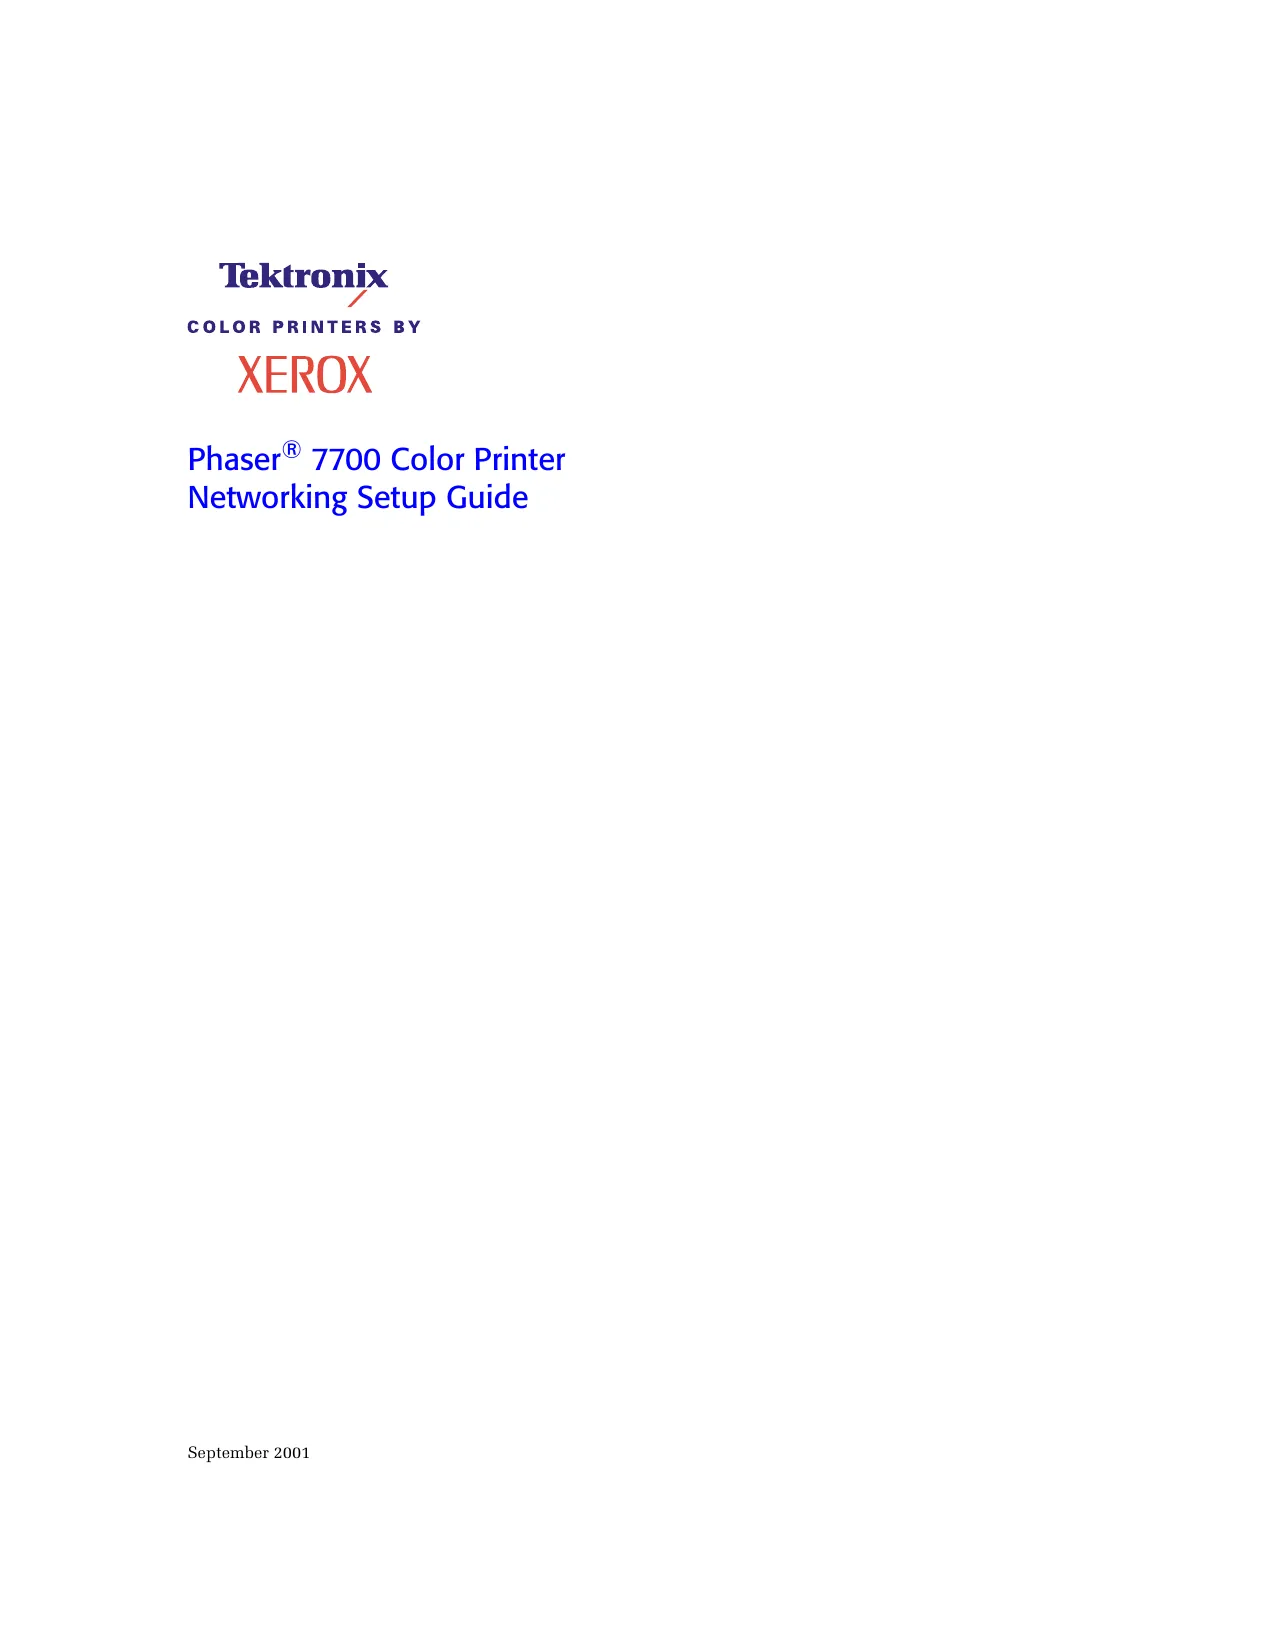 Xerox Tektronix Phaser 7700 color laser printer service manual Preview image 2